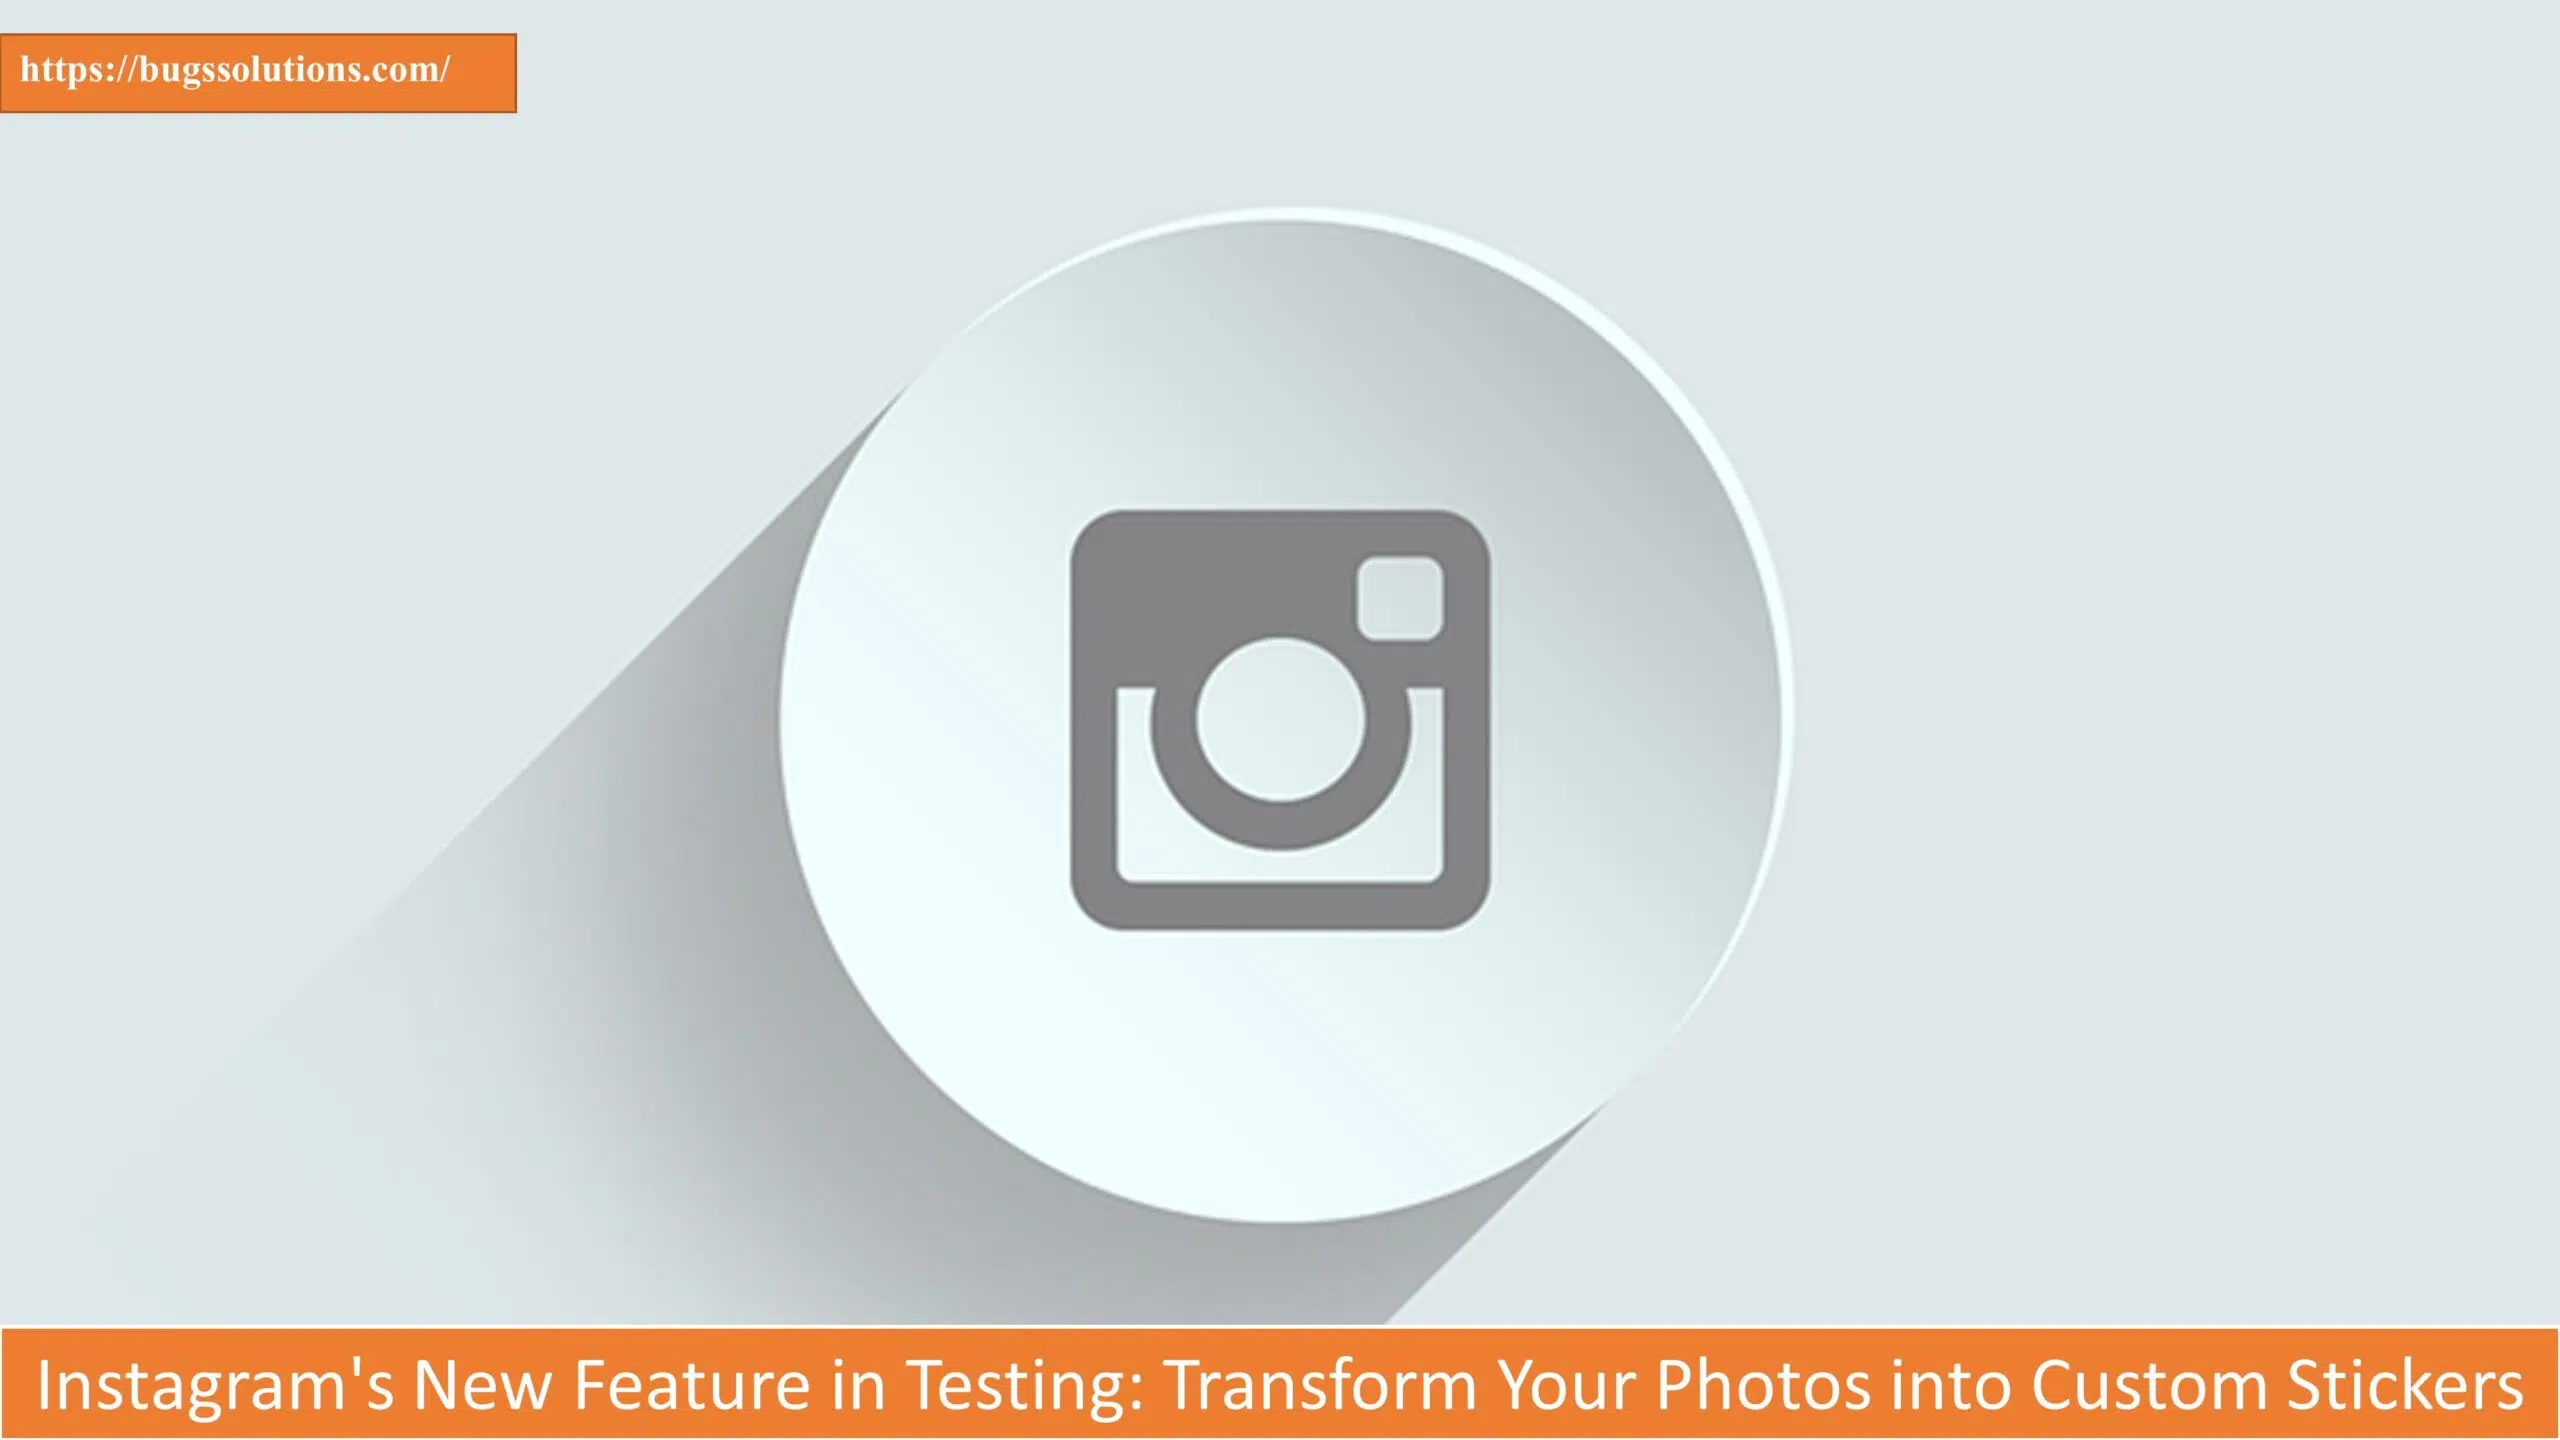 Instagram's New Feature in Testing: Transform Your Photos into Custom Stickers